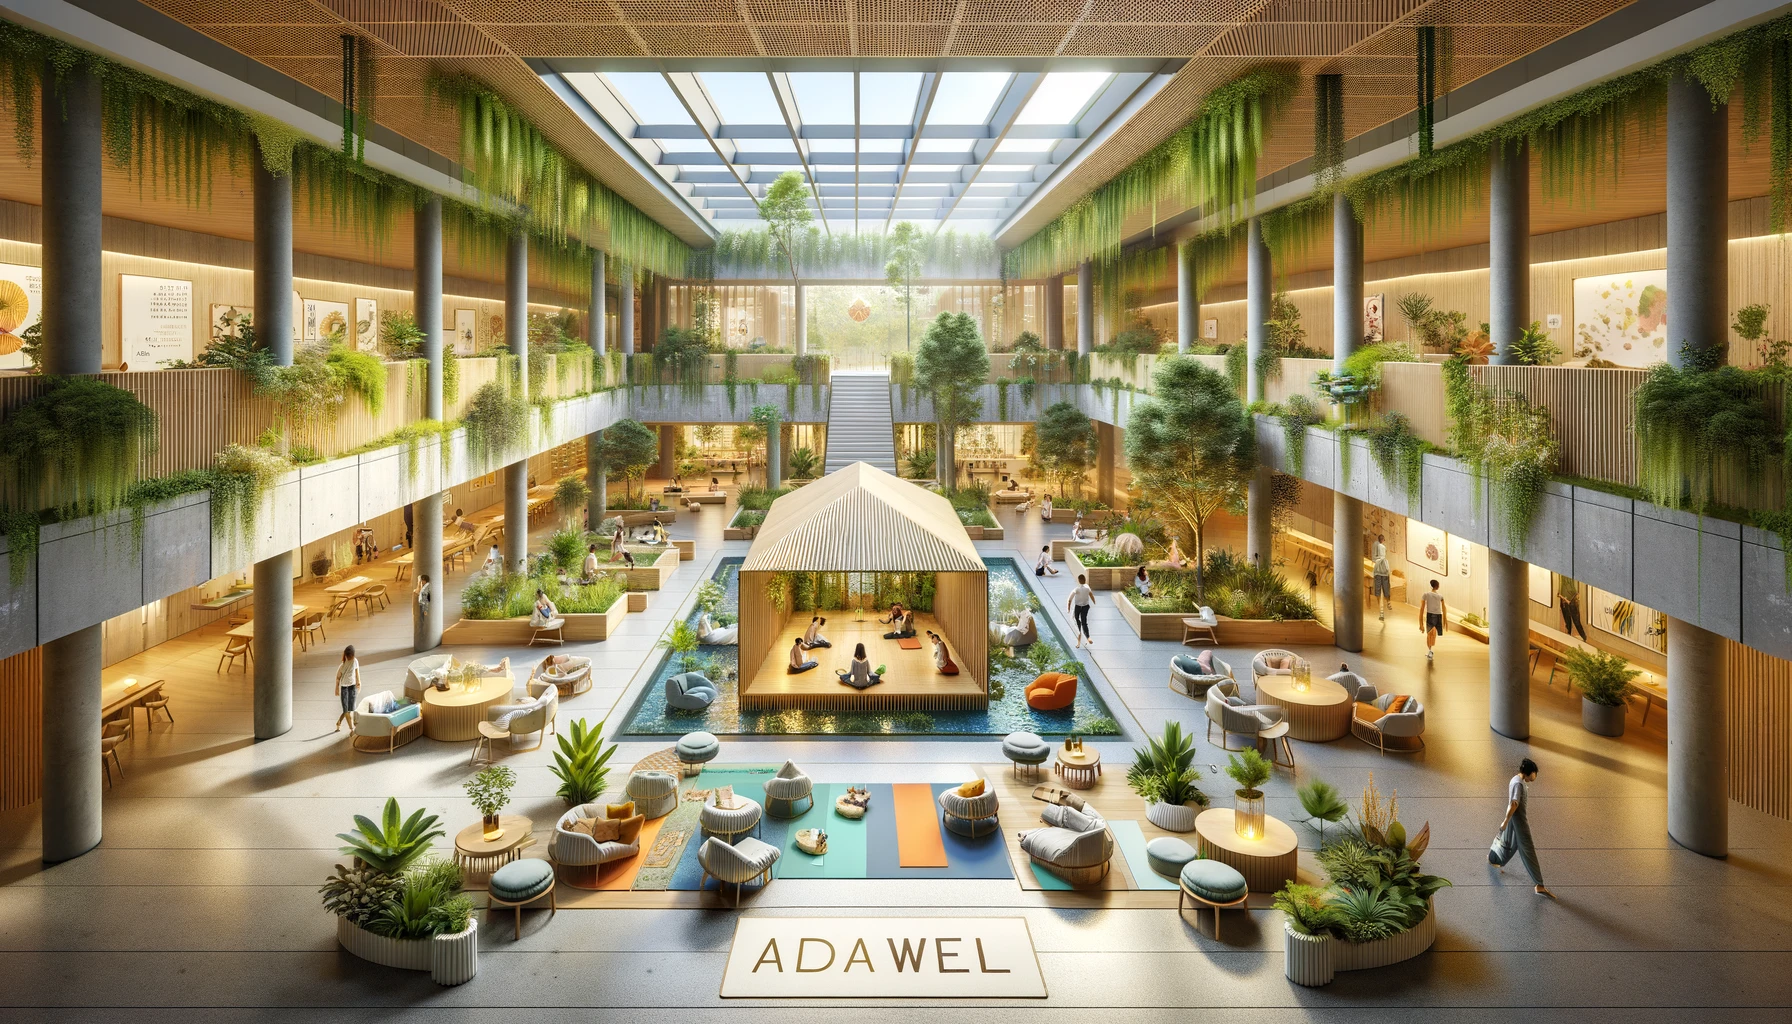 DALLE-2023-11-30-11.53.16—A-digital-illustration-of-a-space-designed-for-Adawell-a-community-focused-on-wellness-initiatives.-The-space-is-a-blend-of-modern-and-natural-elem-76d5b8.png